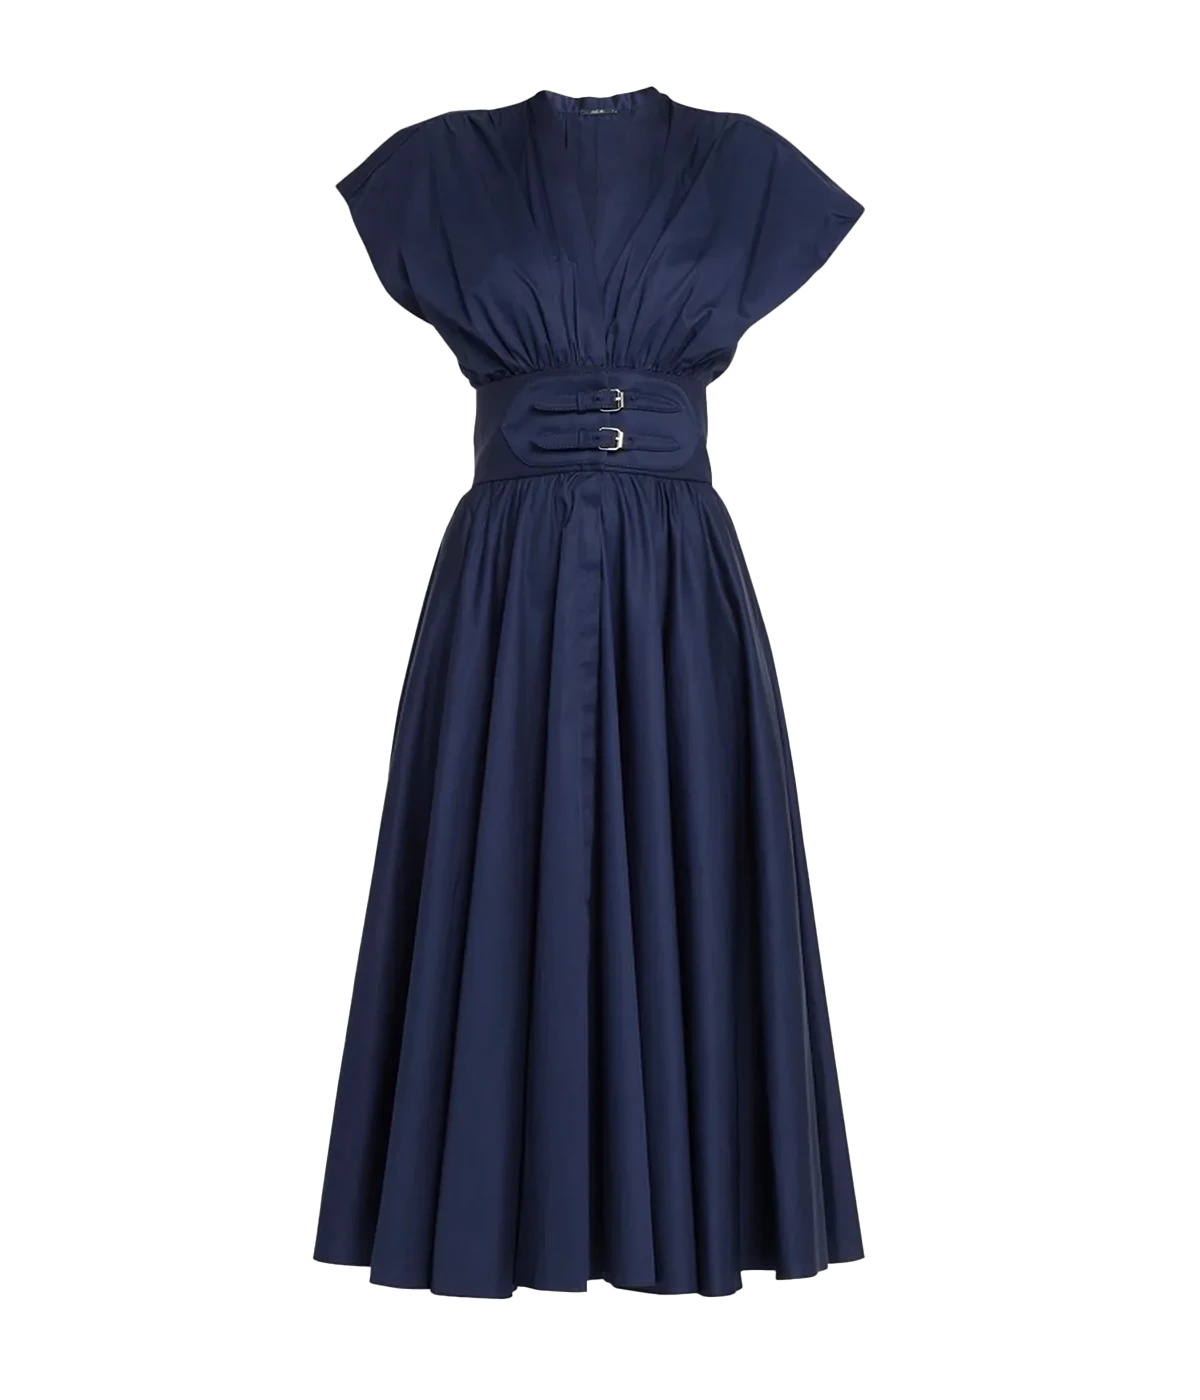  Image of a navy blue cotton mdi dress, featuring a cap sleeve detail, v neck and belt buckle at the waist. Long Lunch, drinks with girlfriends, date night dress, American designer, throw on and go, light weight cotton, summer dress, work wear. 